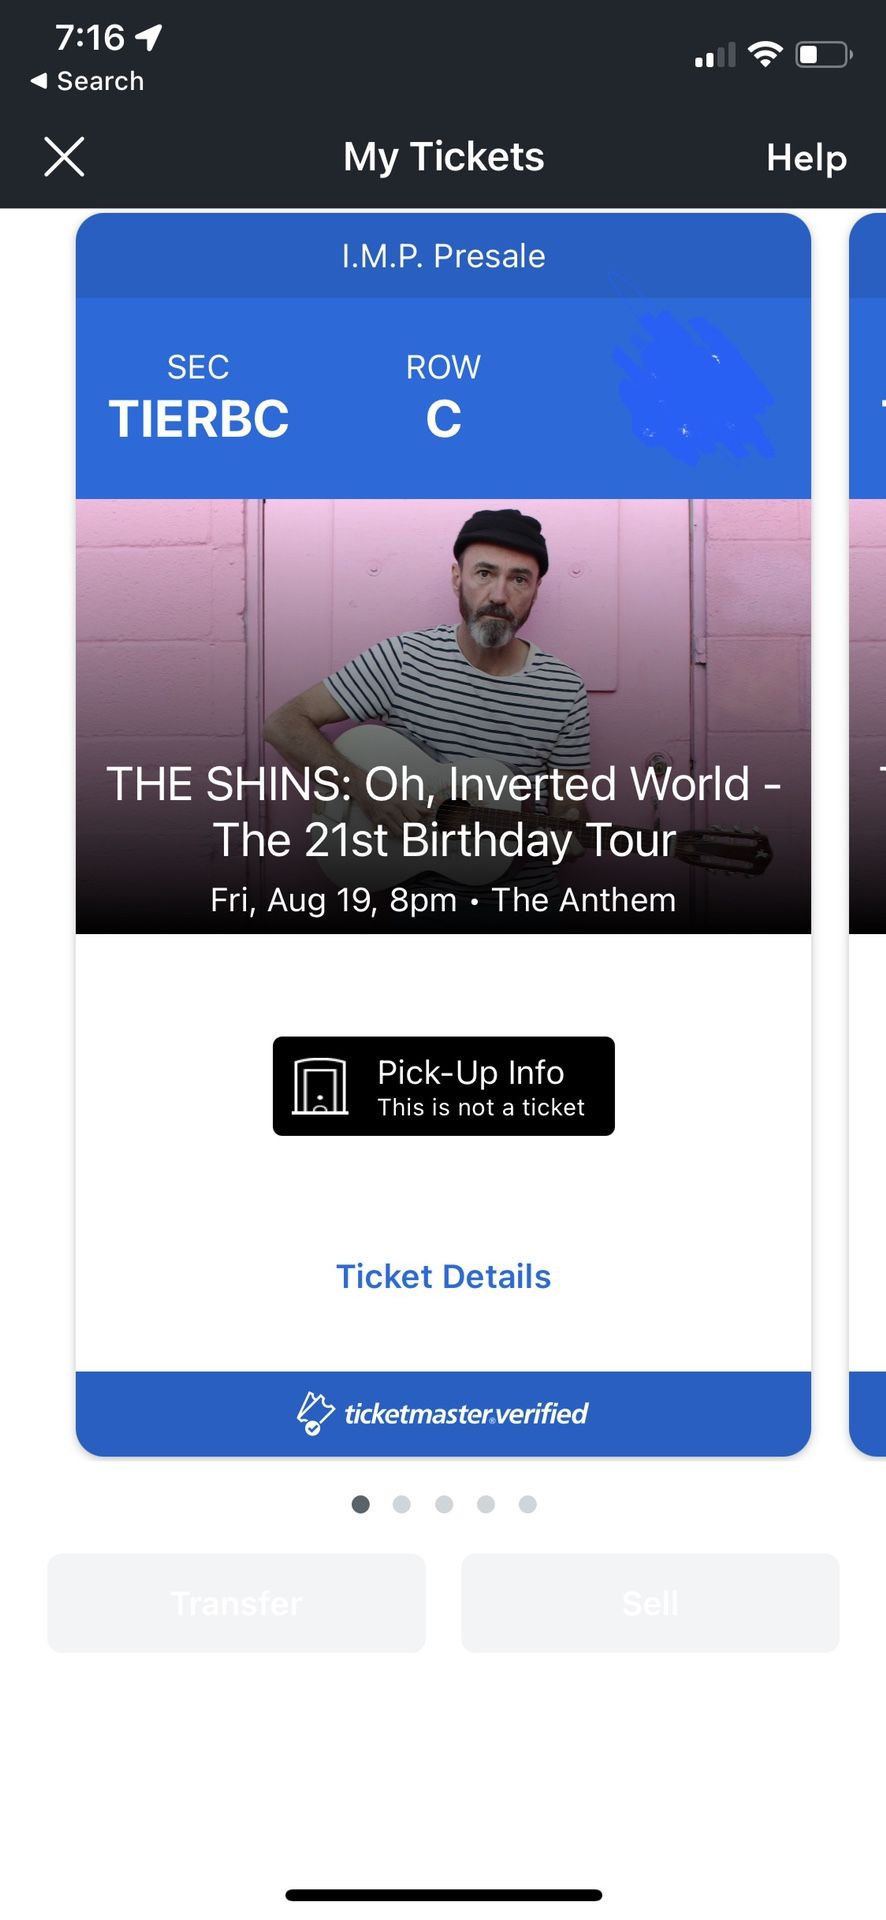 Shins At Anthem Friday 8-19, RESERVED SEATS